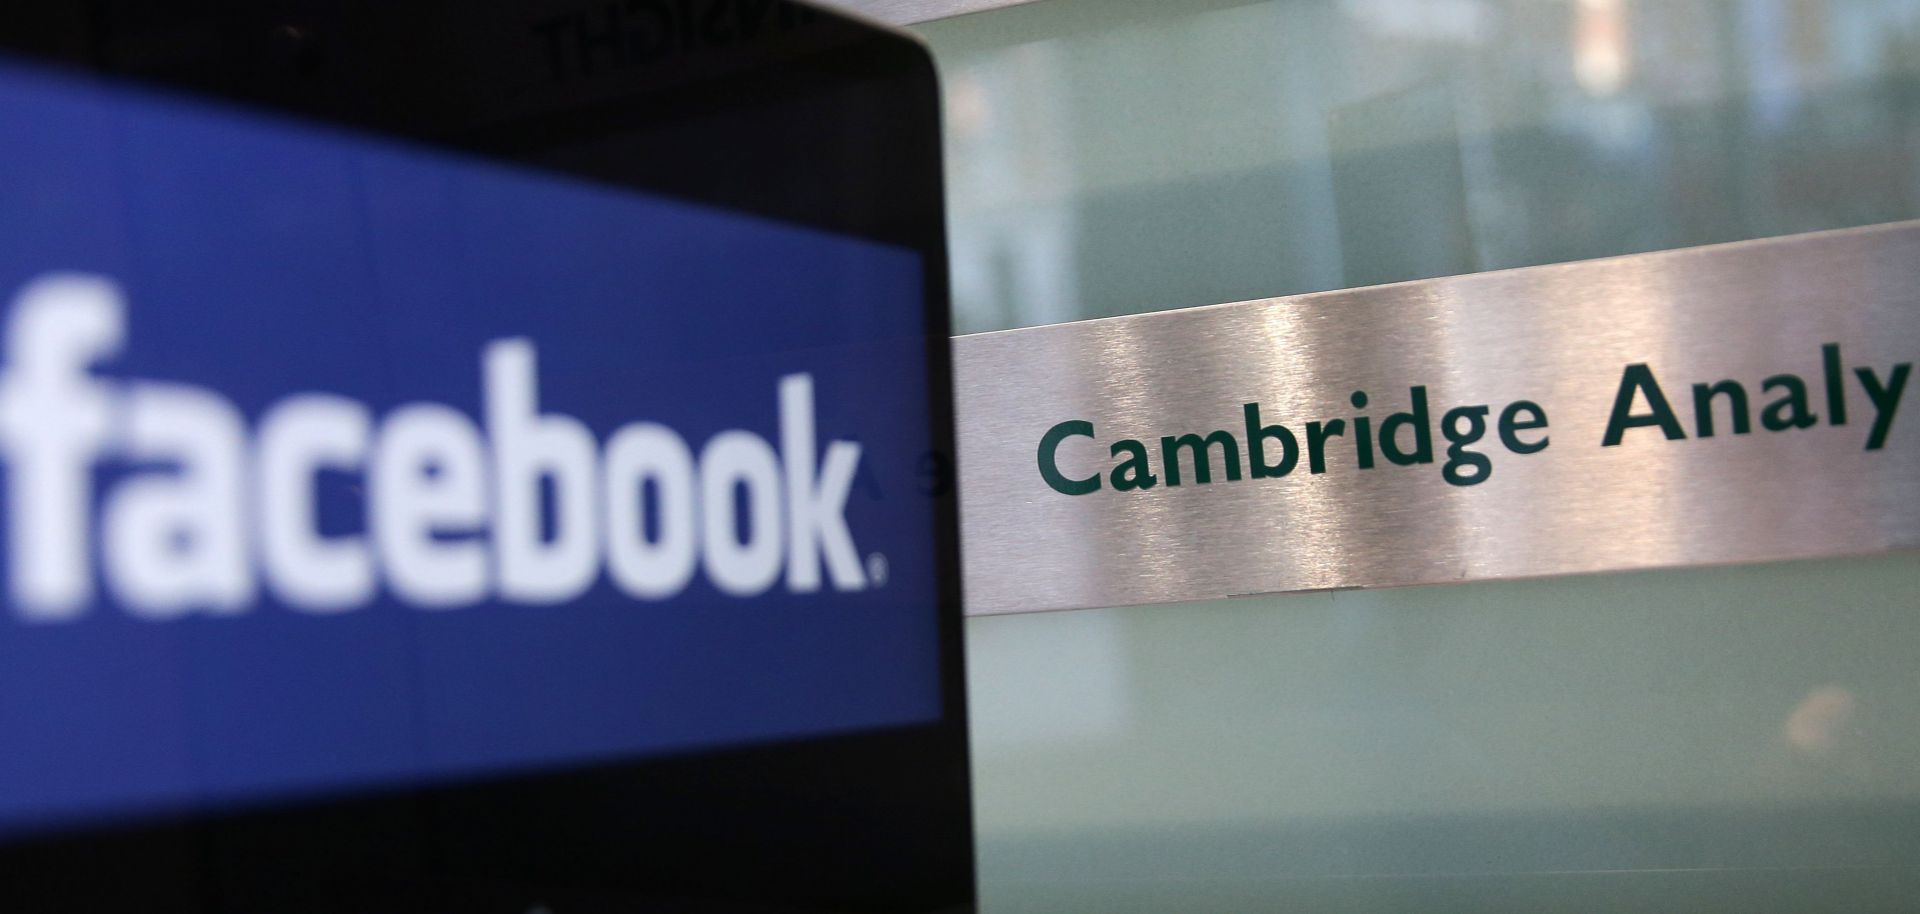 The Facebook logo appears on the screen of a laptop near the offices of Cambridge Analytica in London.